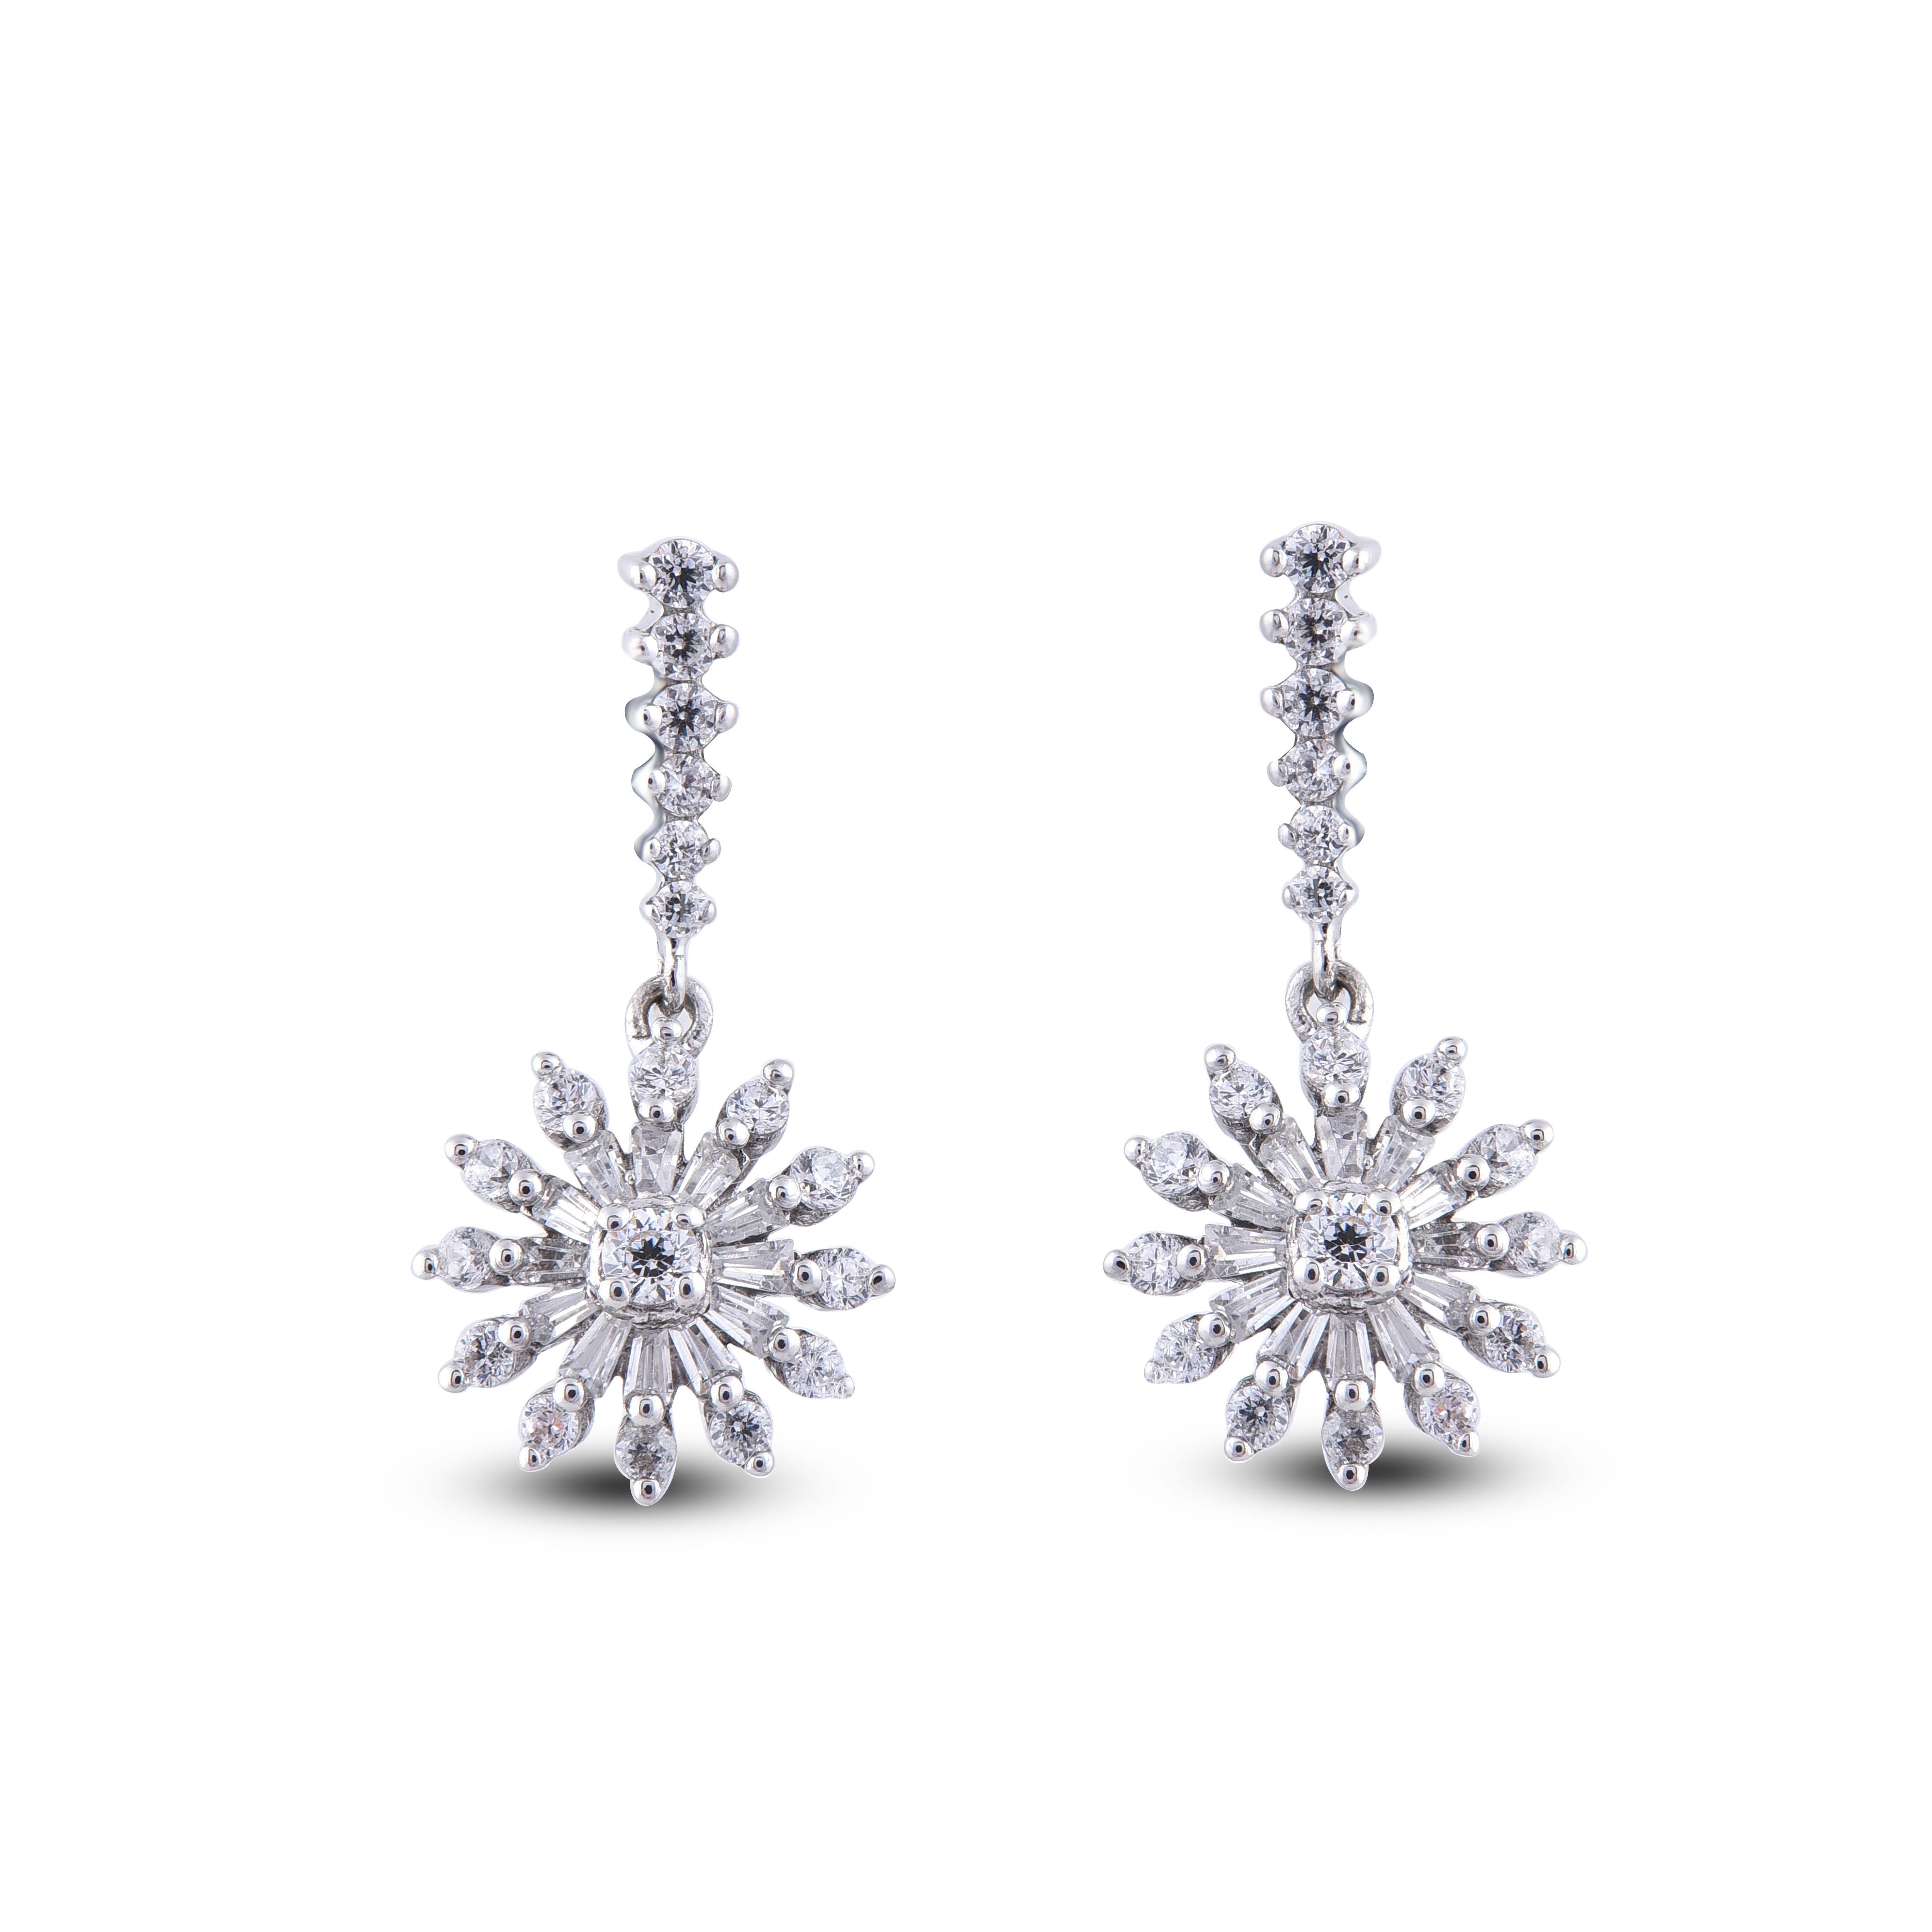 These exquisite design diamond floral drop earrings offer beauty equaled only to her own.These earrings feature 38 round and 24 baguette diamond set in prong setting and fashioned in 14 Karat White Gold. These timeless stud earrings secure